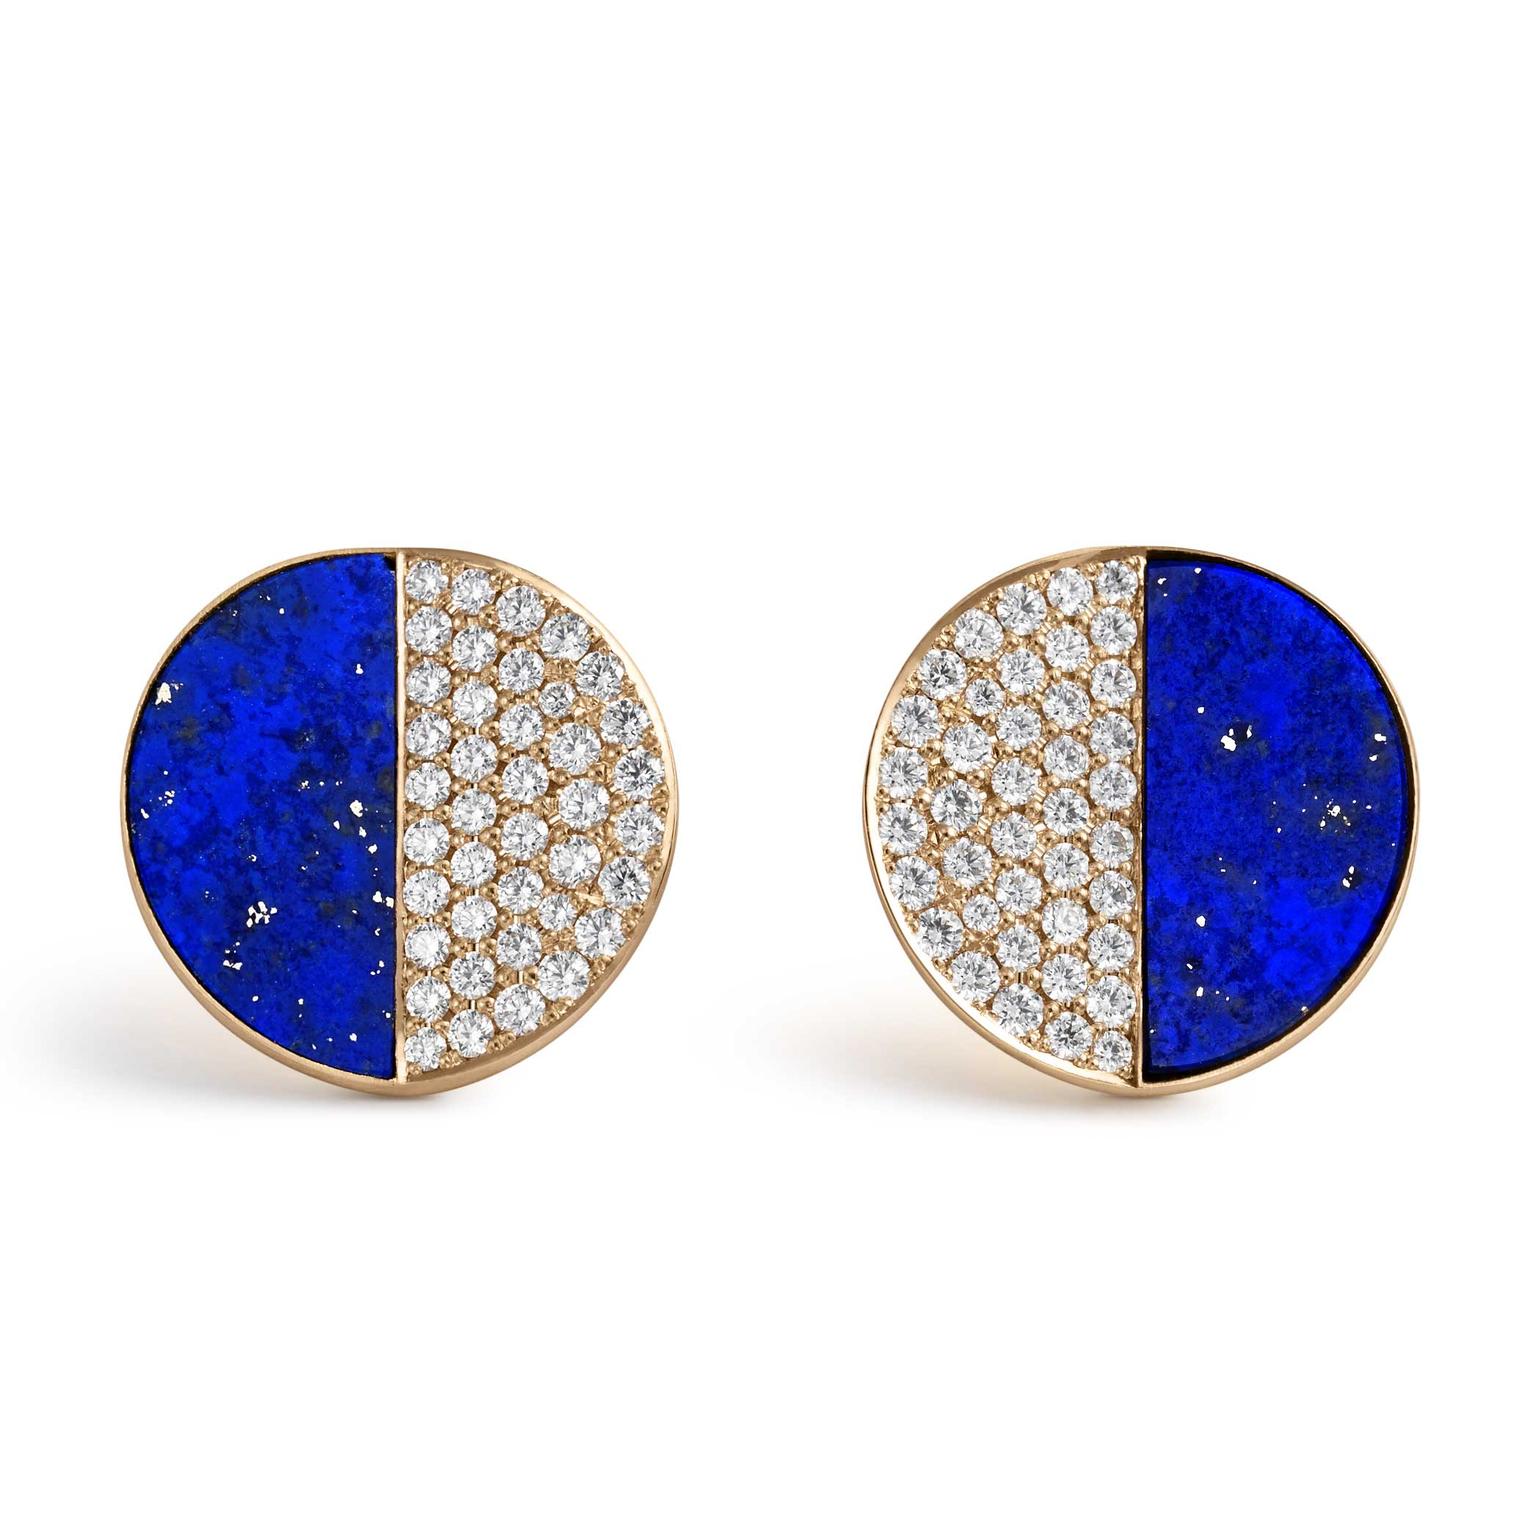 Bucherer B Dimension ear studs with diamonds and lapis lazuli in rose gold Price £2200